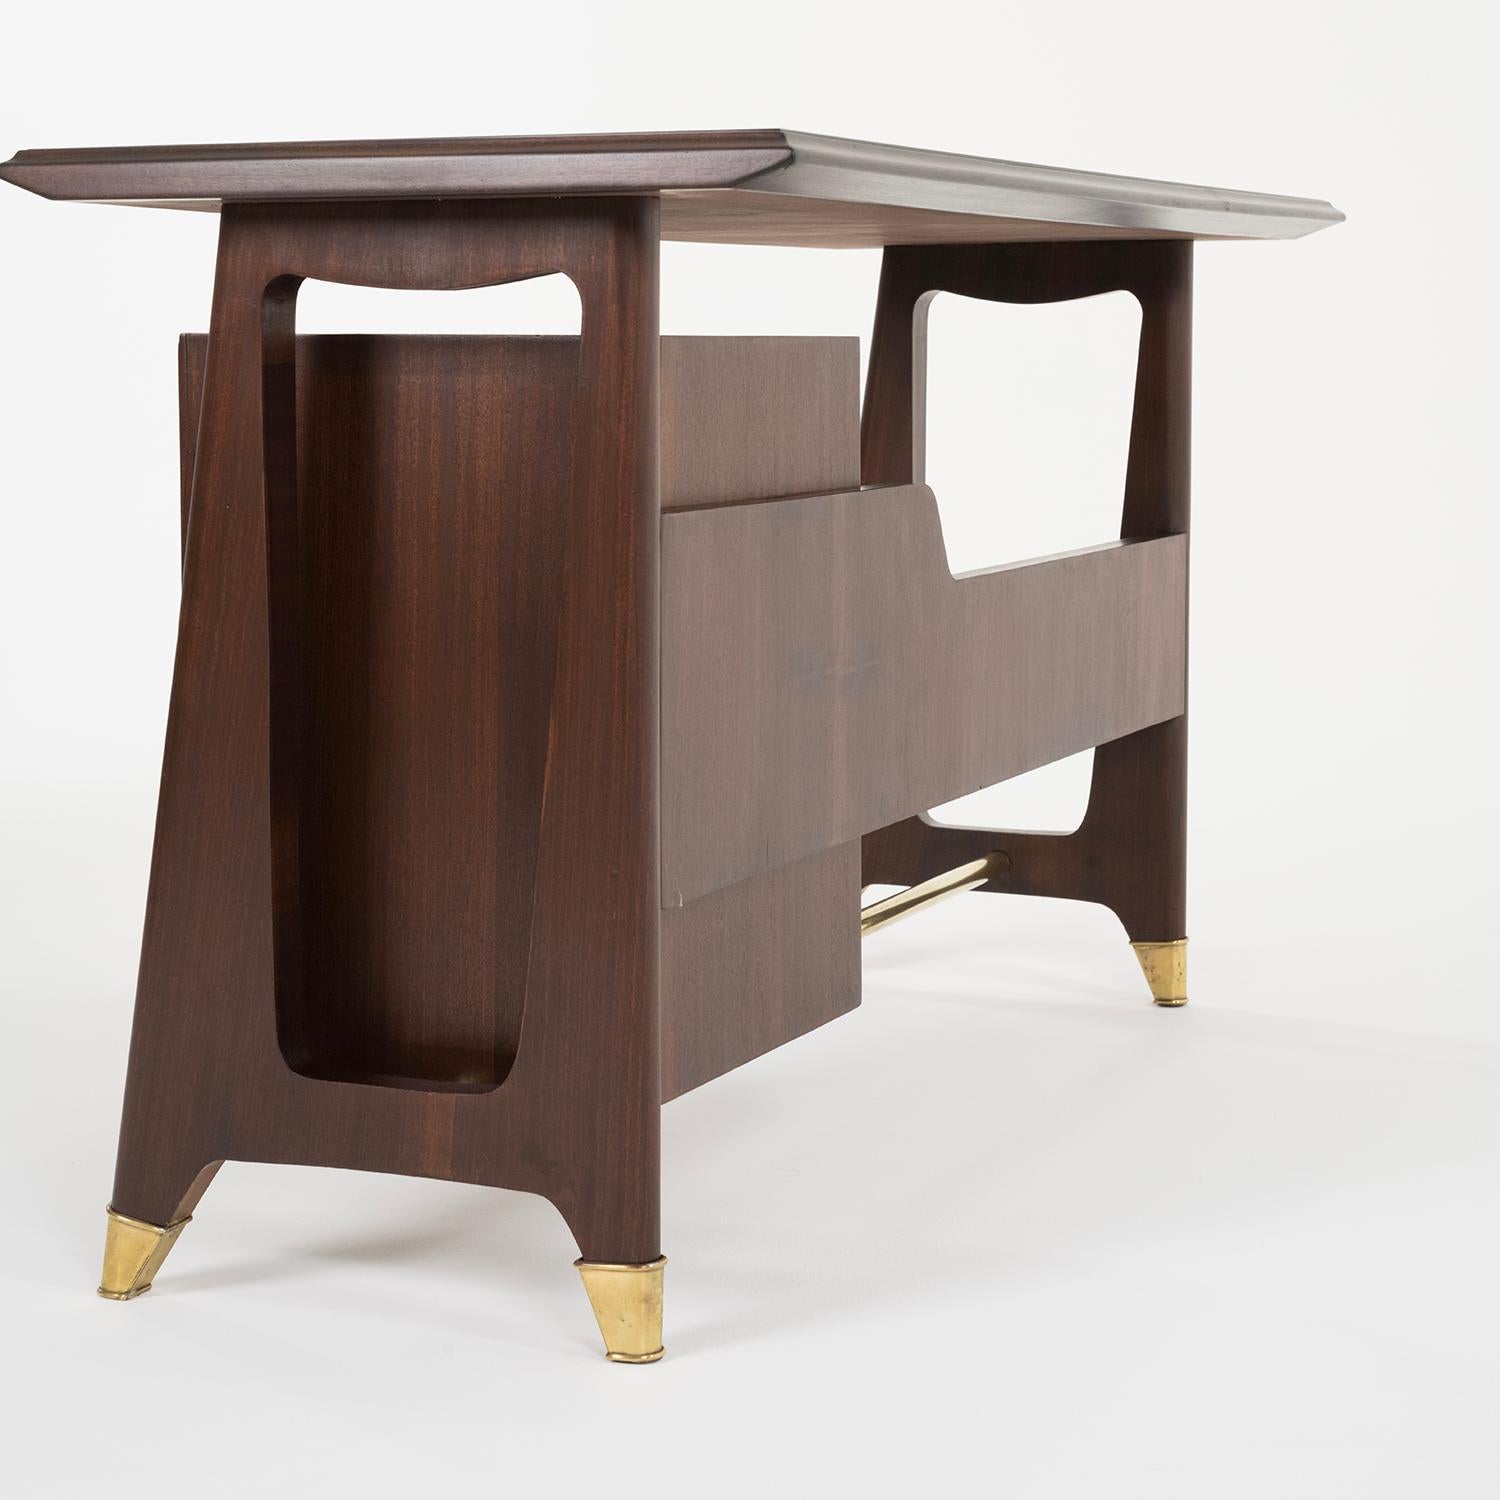 20th Century Italian Vintage Rosewood Writing Desk Attributed to Vittorio Dassi For Sale 4